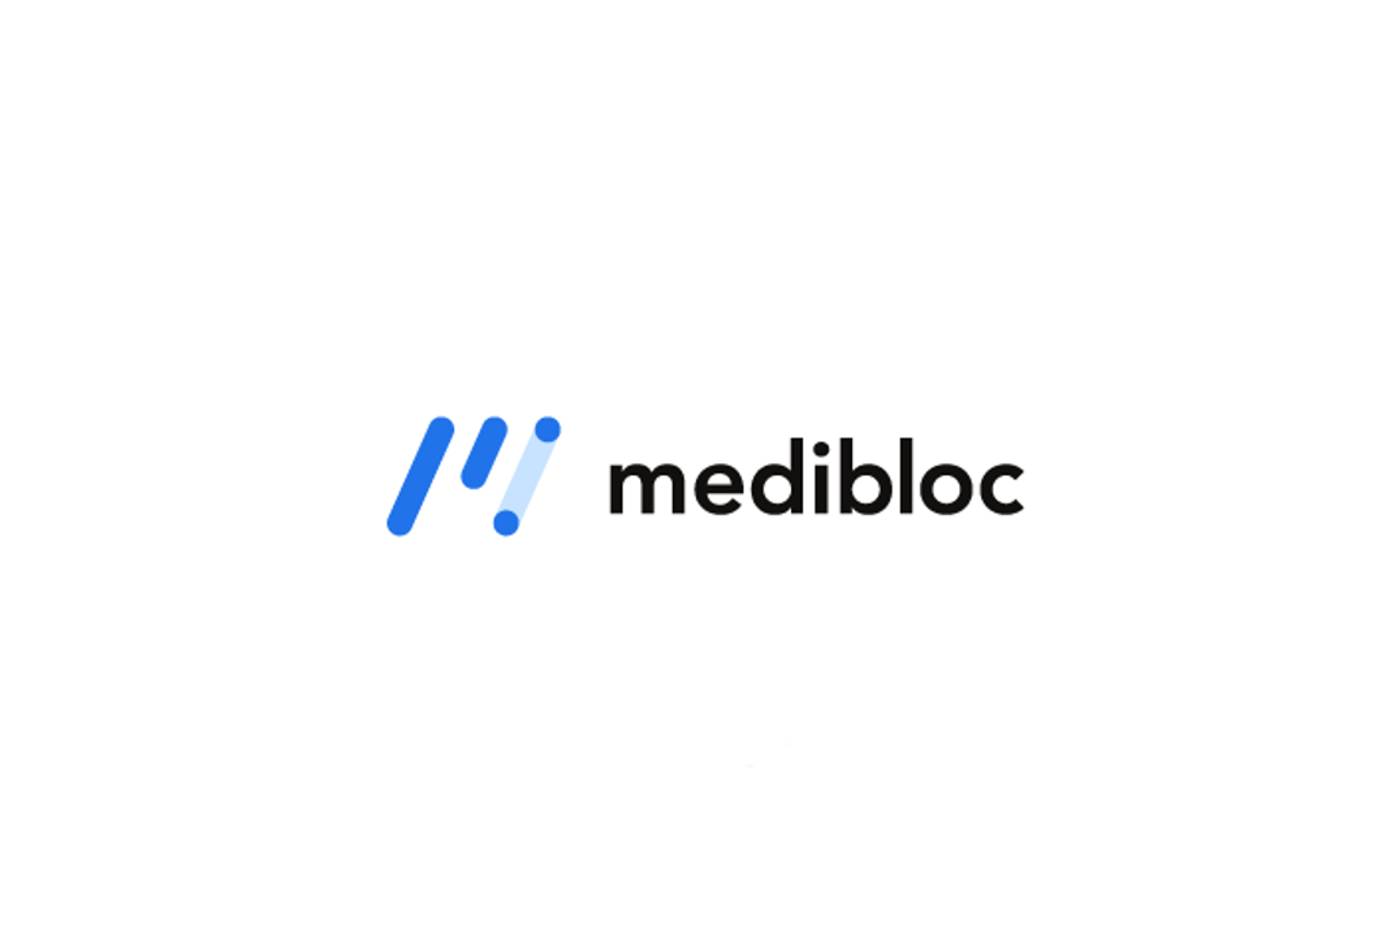 MediBloc (MED) Price Prediction 2022-2030: Expert Opinion